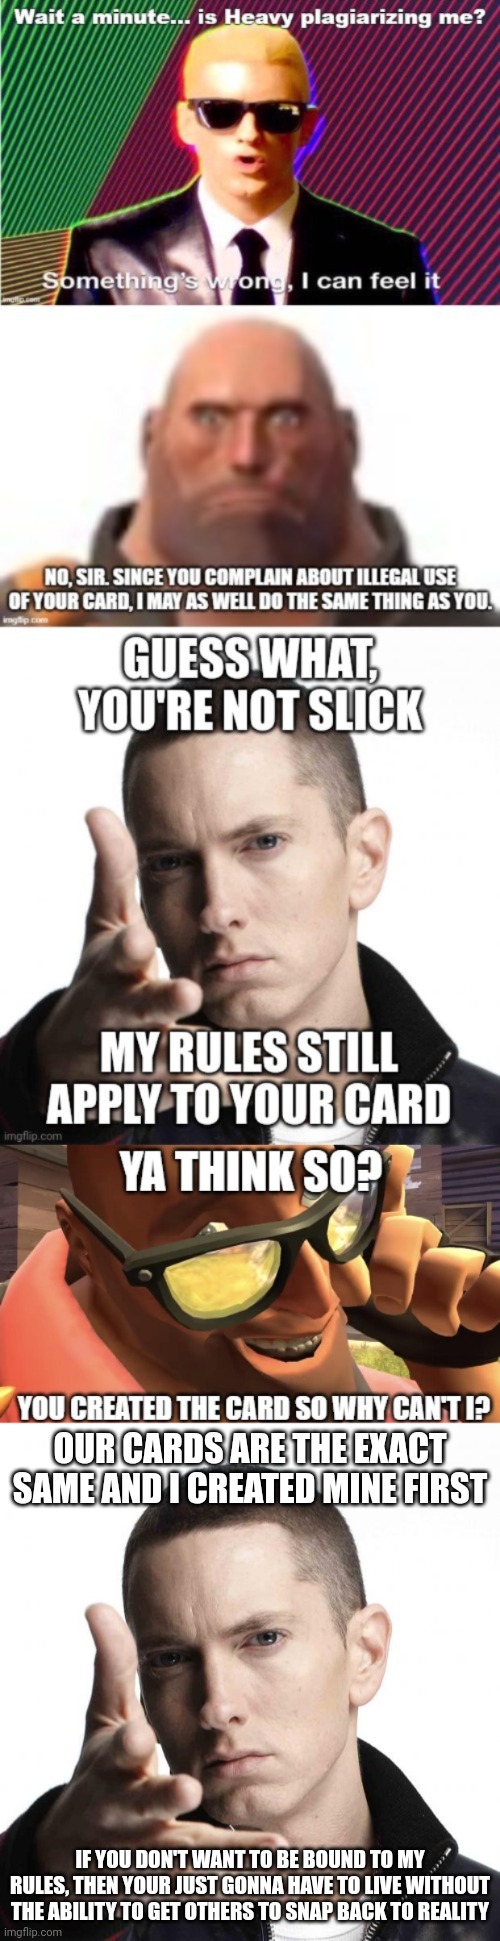 OUR CARDS ARE THE EXACT SAME AND I CREATED MINE FIRST; IF YOU DON'T WANT TO BE BOUND TO MY RULES, THEN YOUR JUST GONNA HAVE TO LIVE WITHOUT THE ABILITY TO GET OTHERS TO SNAP BACK TO REALITY | image tagged in eminem video game logic | made w/ Imgflip meme maker